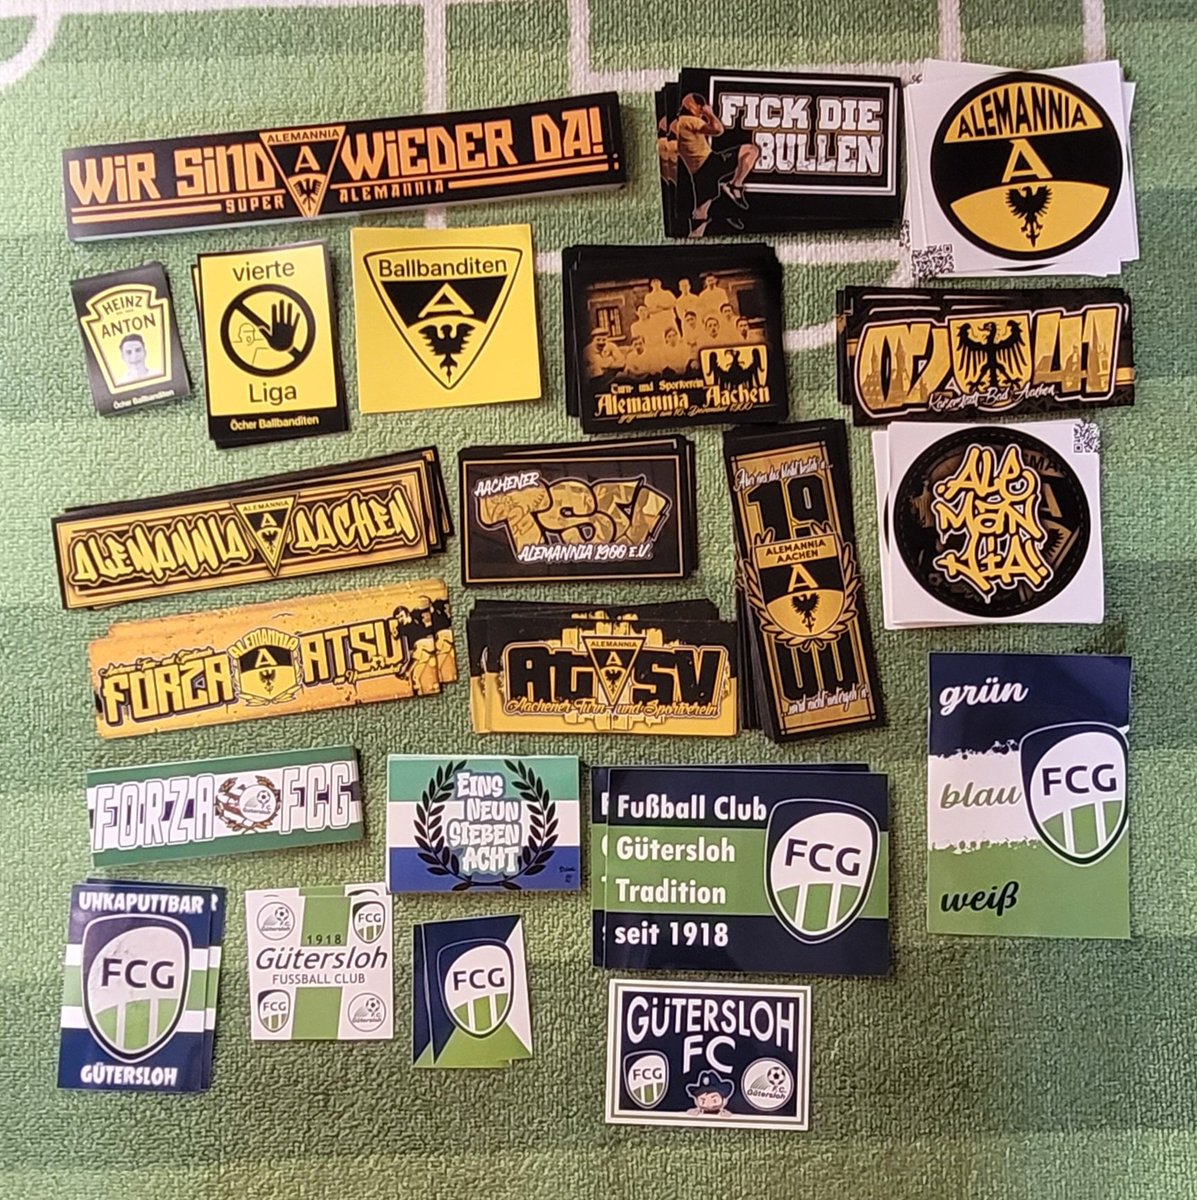 Souvenirs from my trip. So many, I needed 2 photos 😁

As well as my usual haul of scarves, got lots of new shiny Ultras stickers too. 🇩🇪⚽️